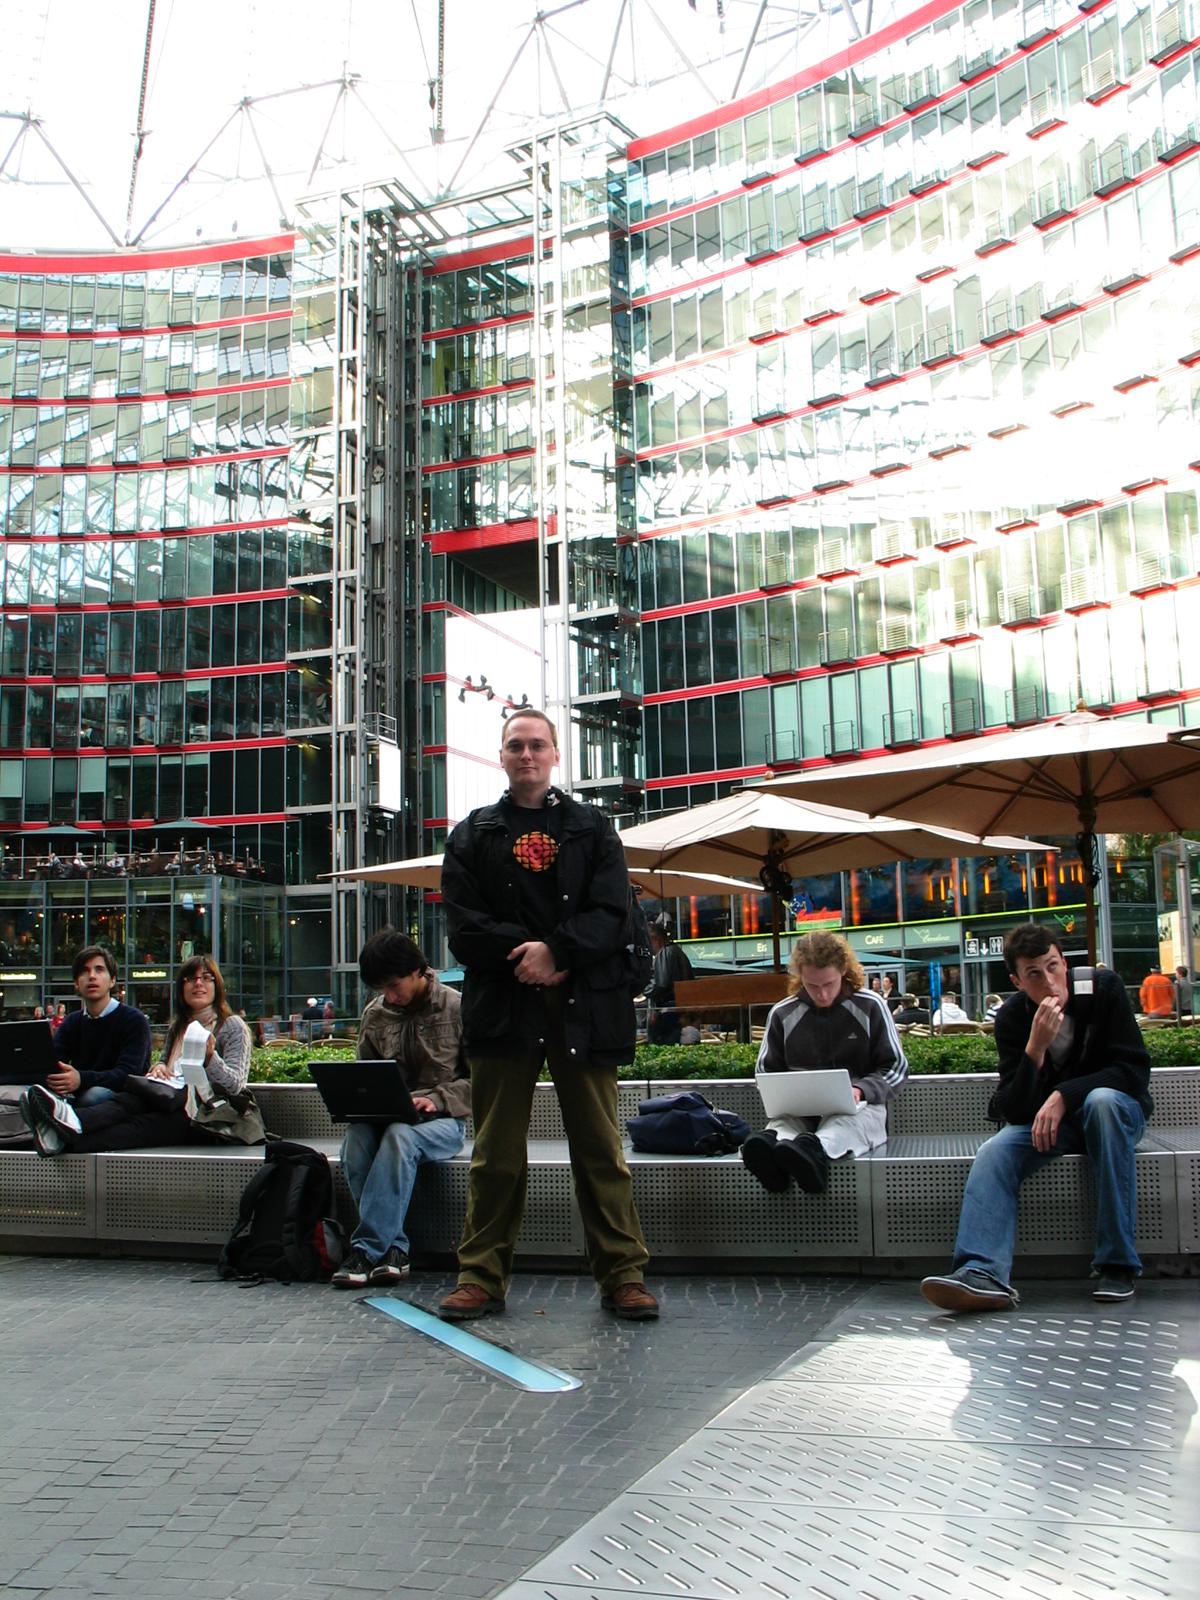 Me at the Sony Centre